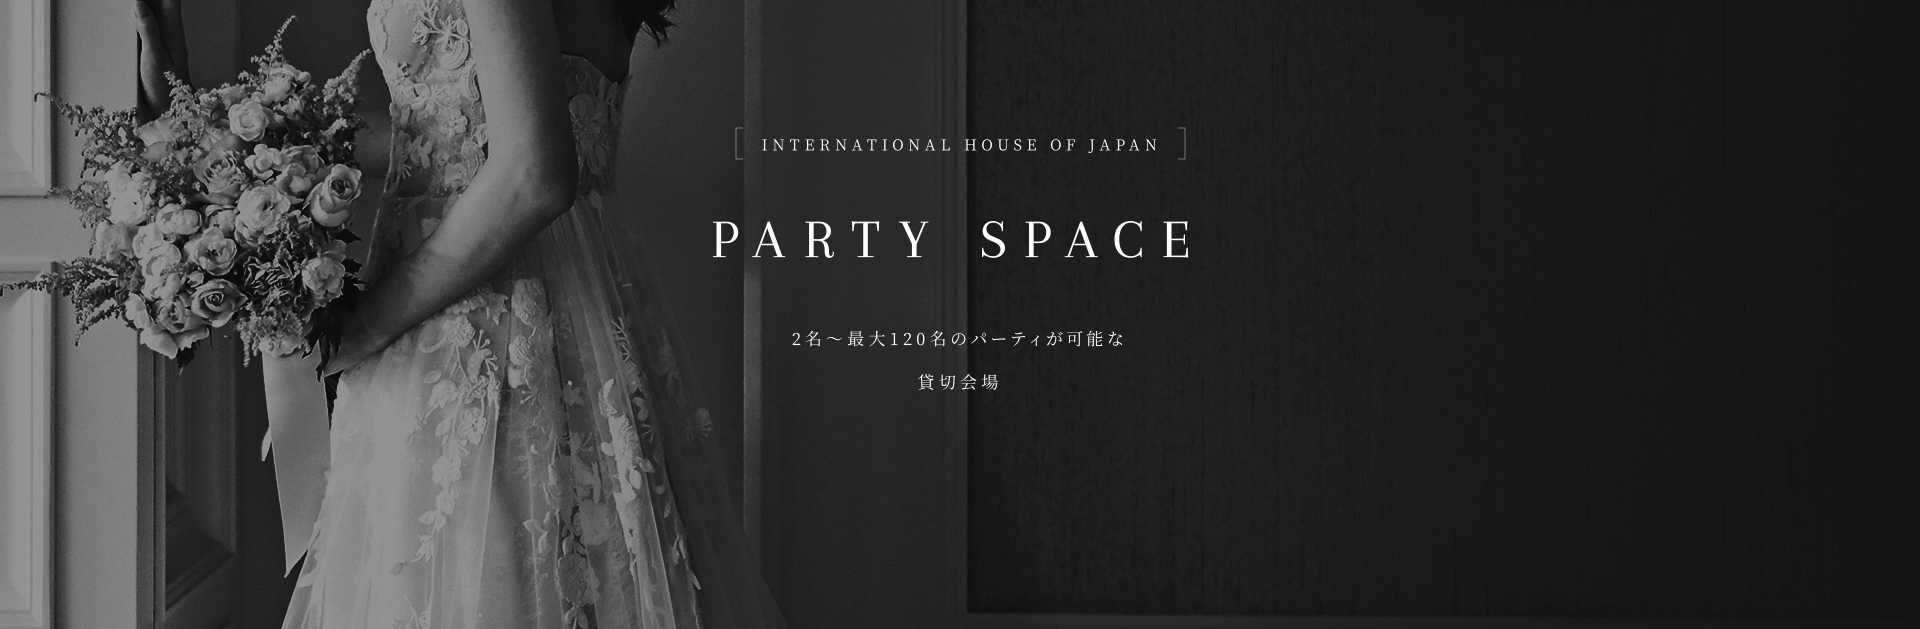 PARTY SPACE 2名～最大120名のパーティーが可能な貸切会場